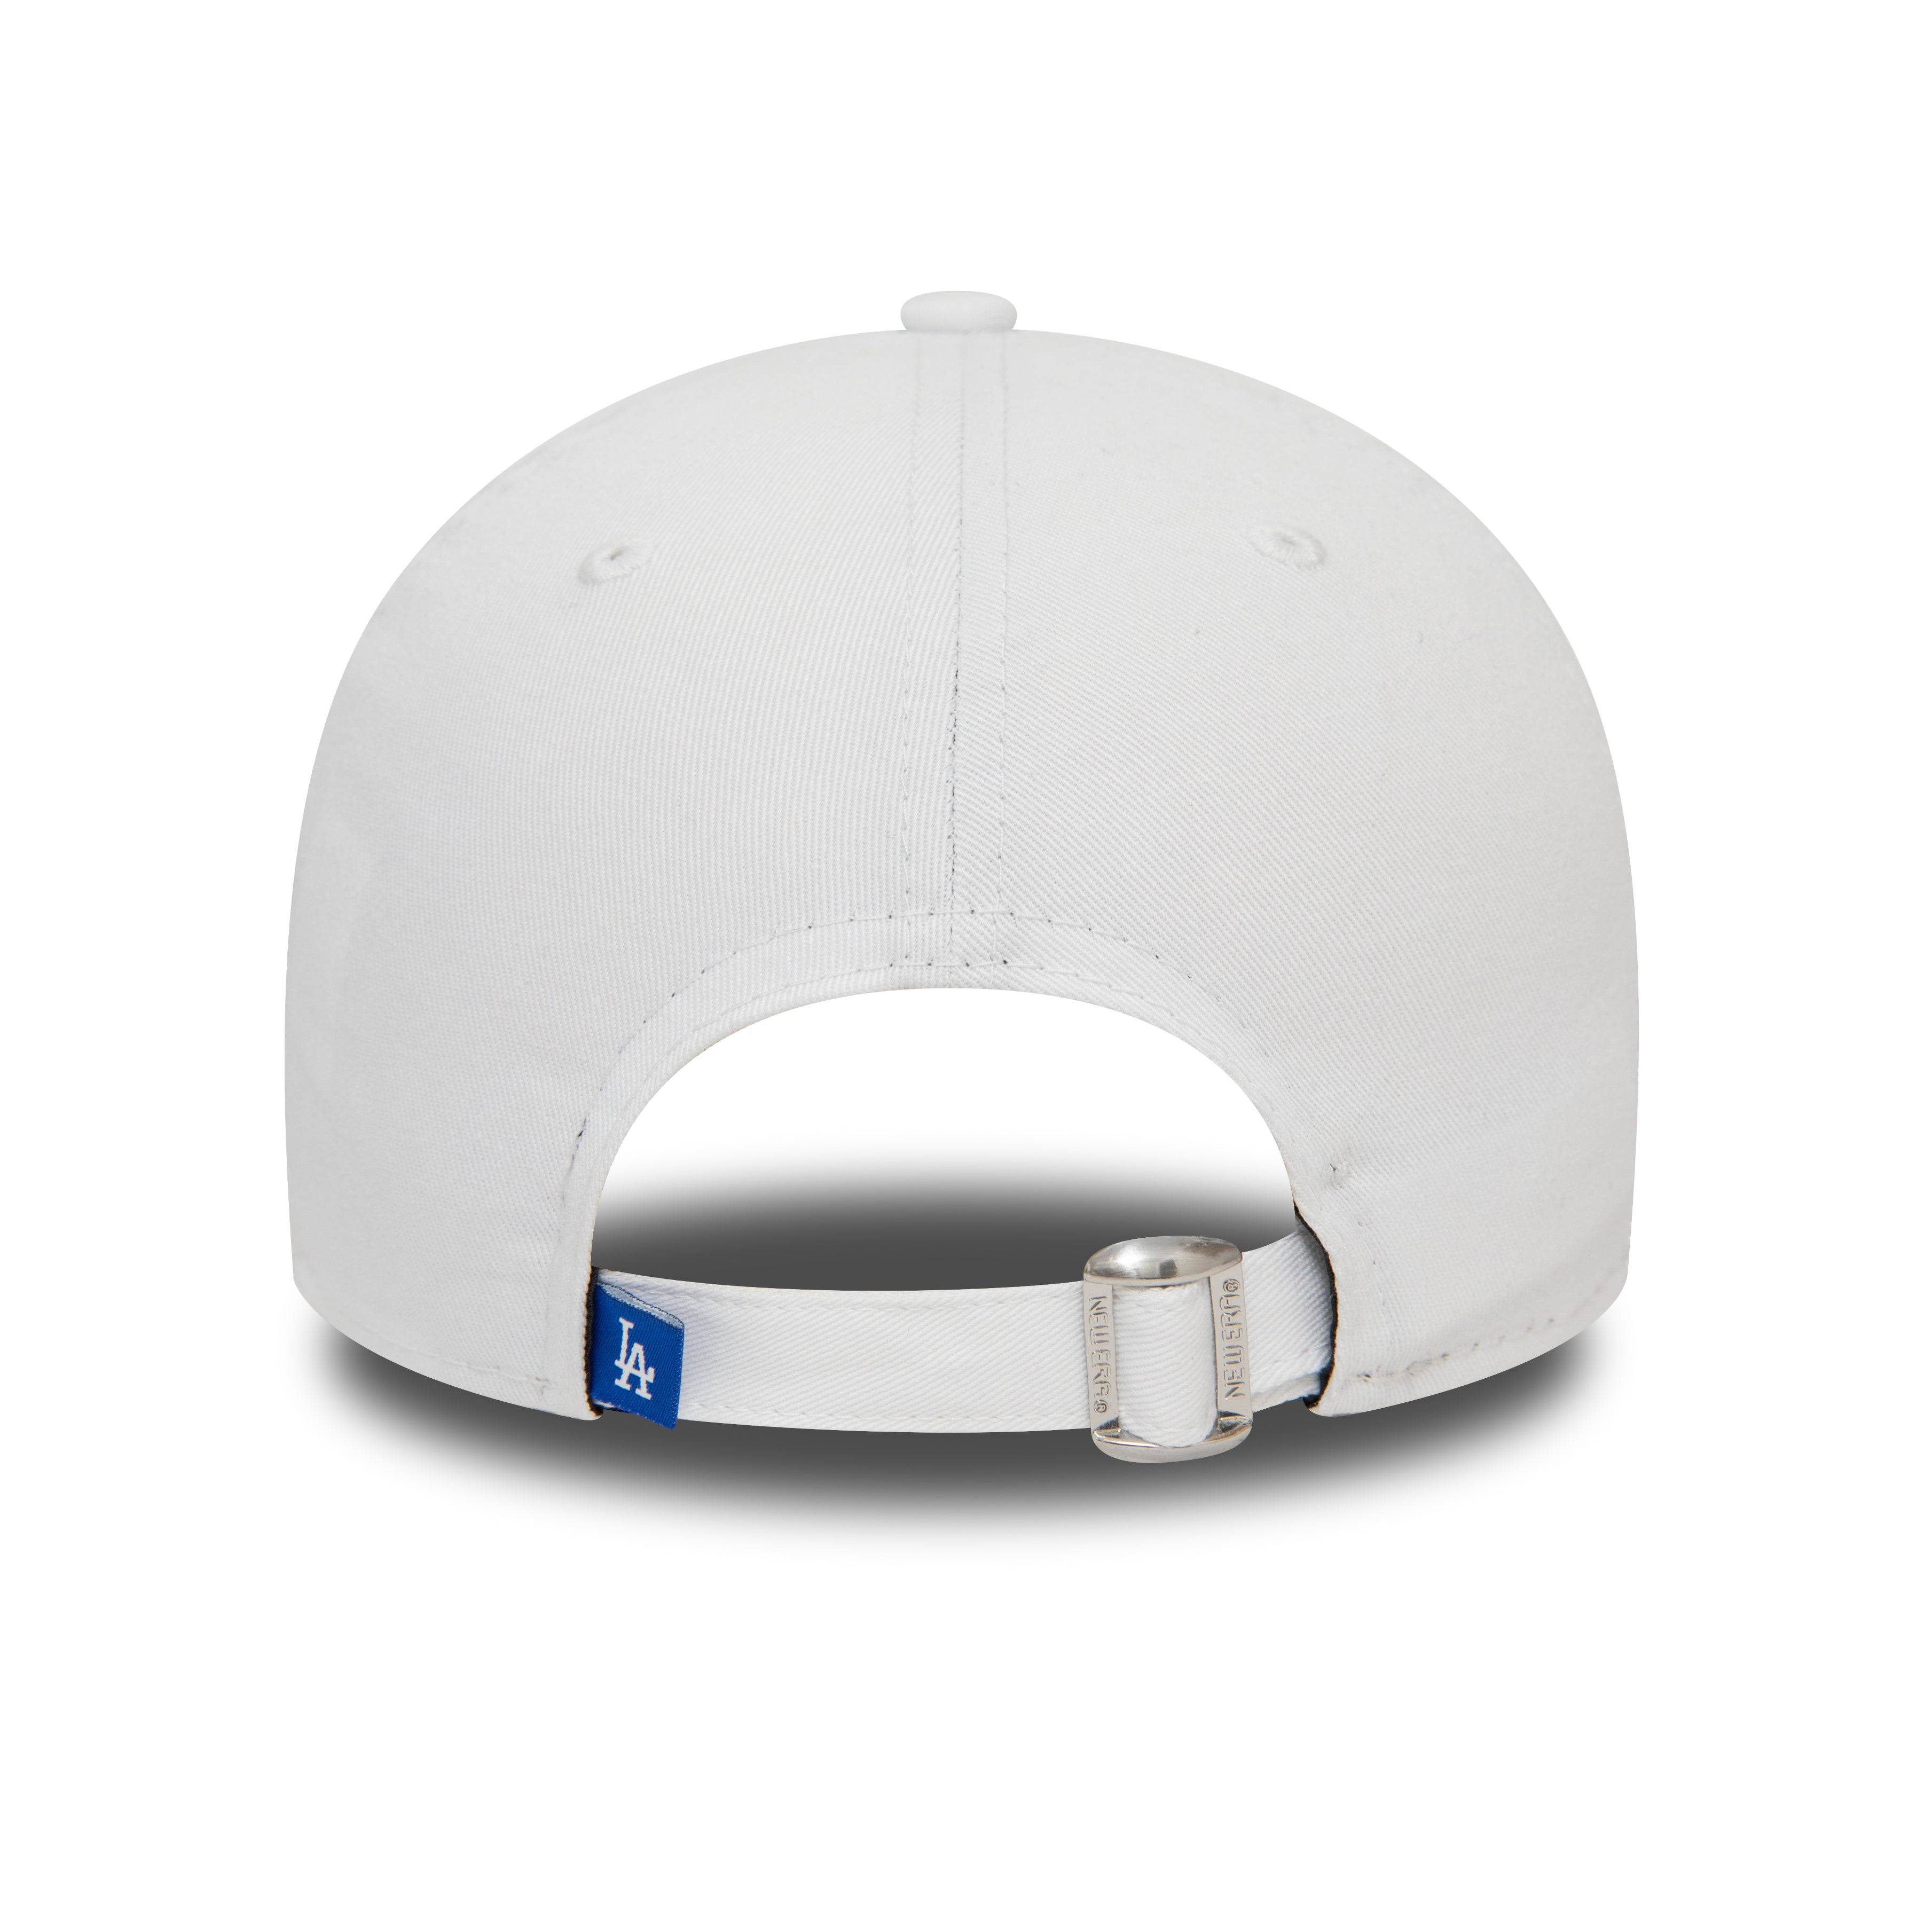 NEW ERA 9FORTY MLB LOS ANGELES DODGERS FOOD CHARACTER WHITE CAP